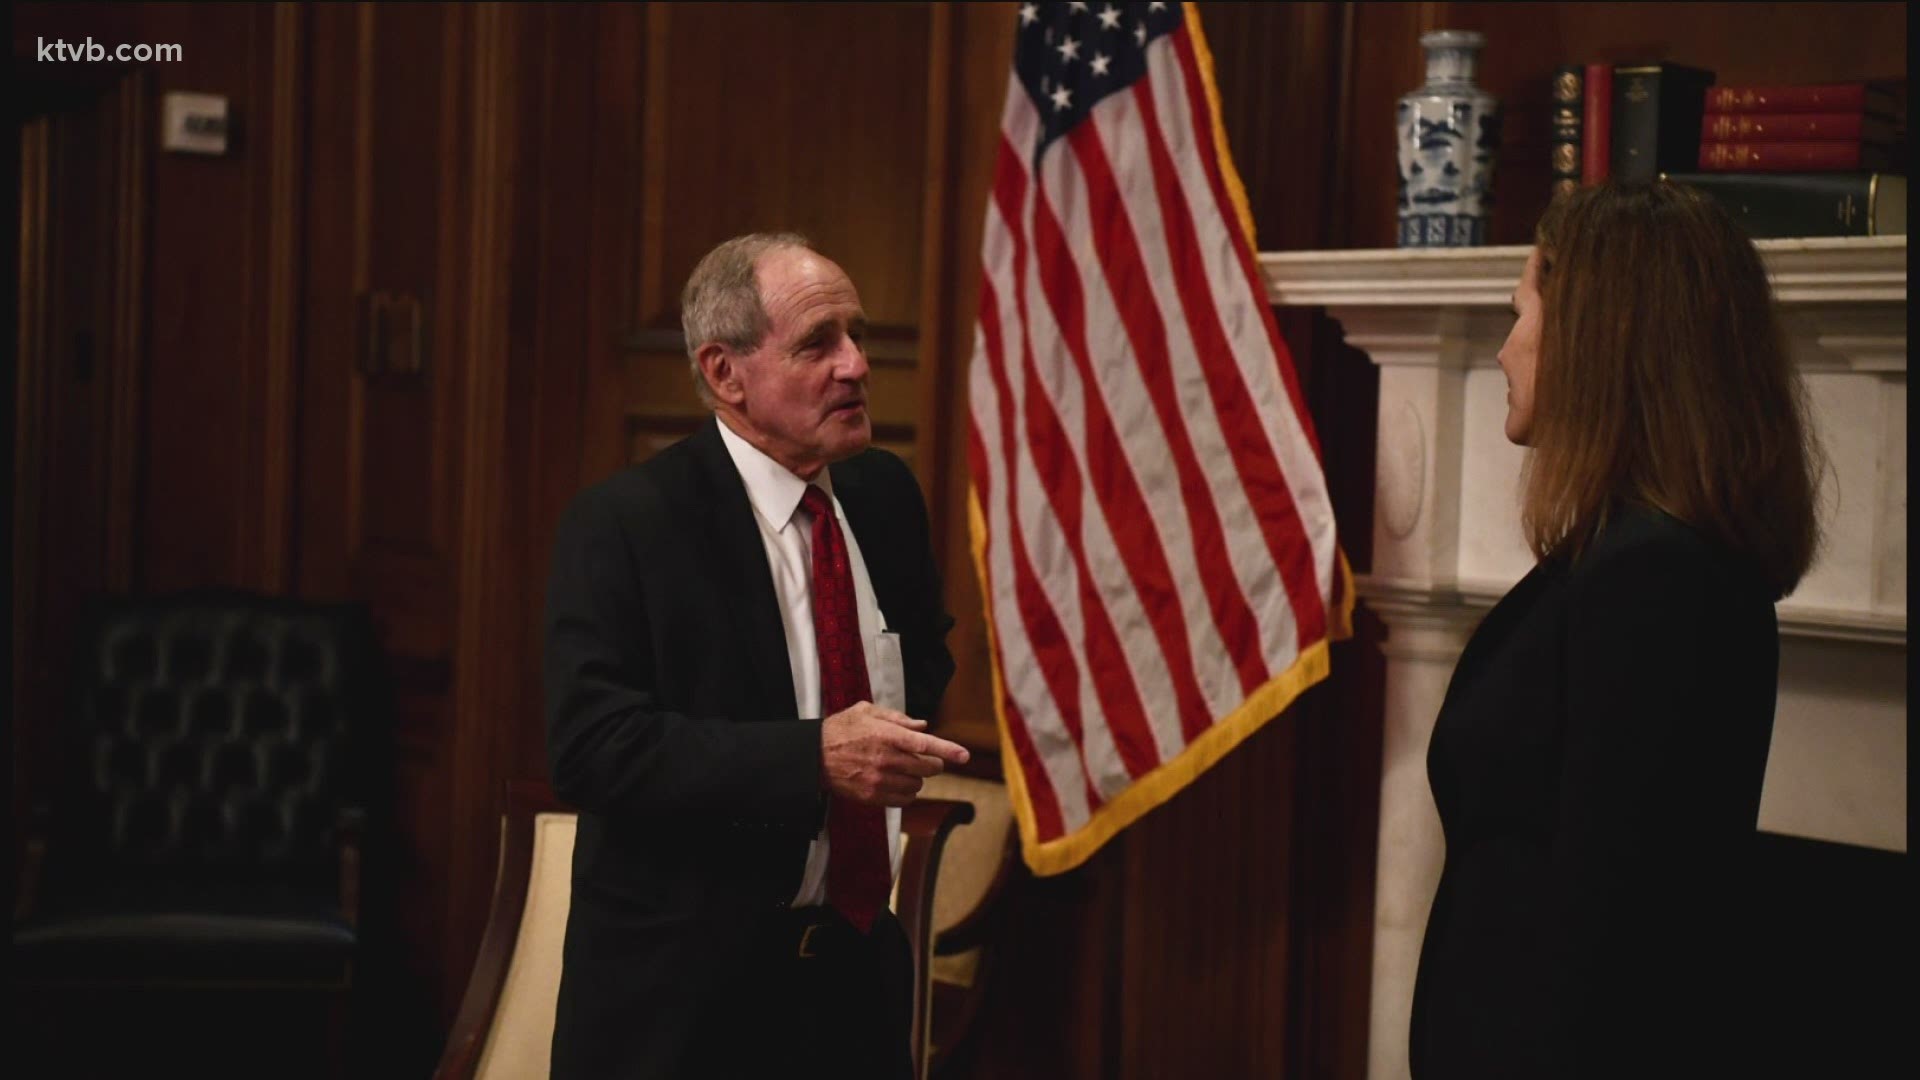 Risch made the remarks after meeting with Barrett on Wednesday. Her confirmation hearing starts on October 12th.